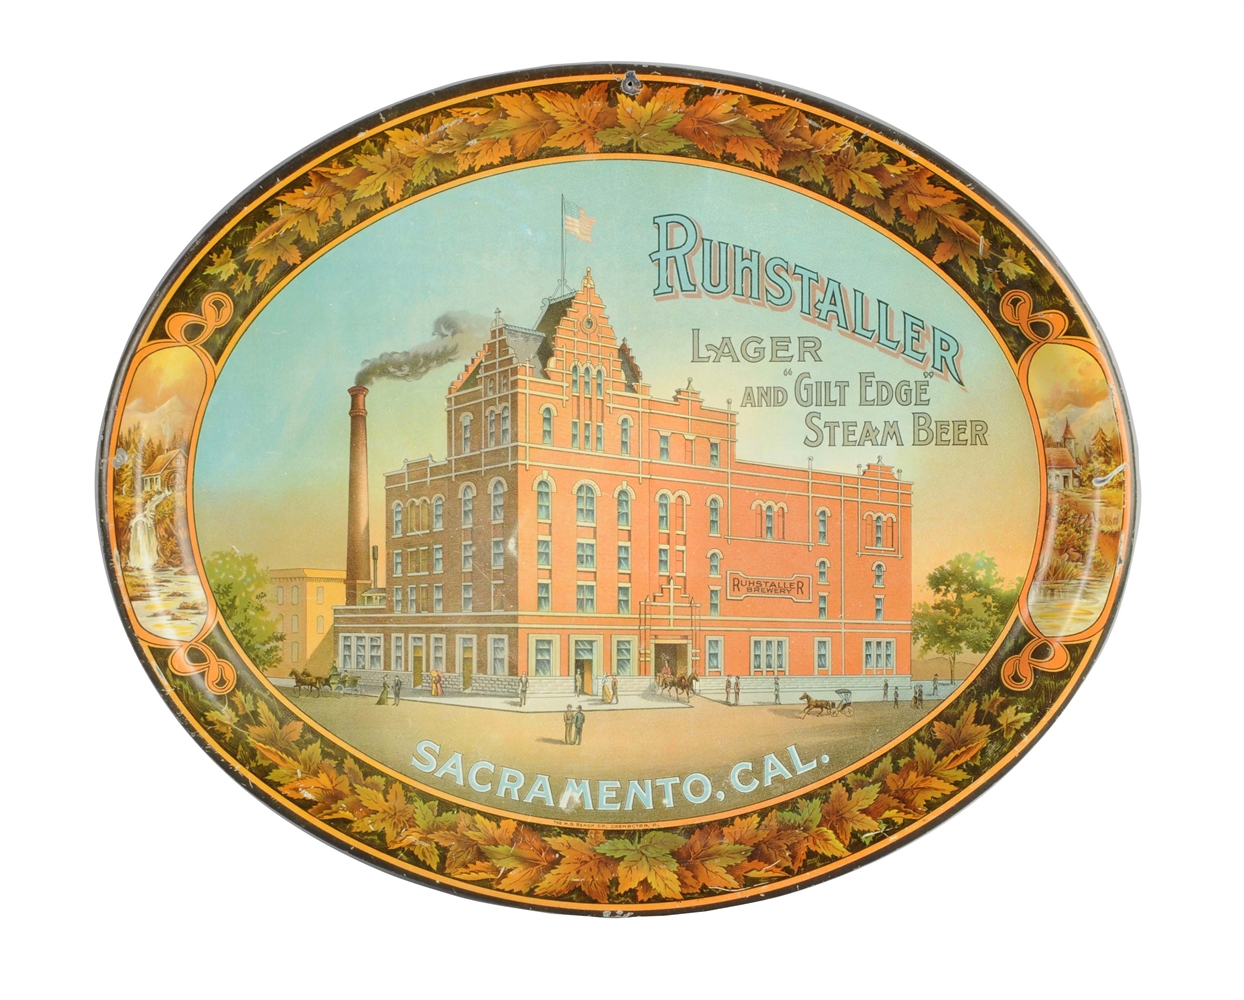 RUHSTALLER LAGER BREWERY STEAM BEER SERVING TRAY. 